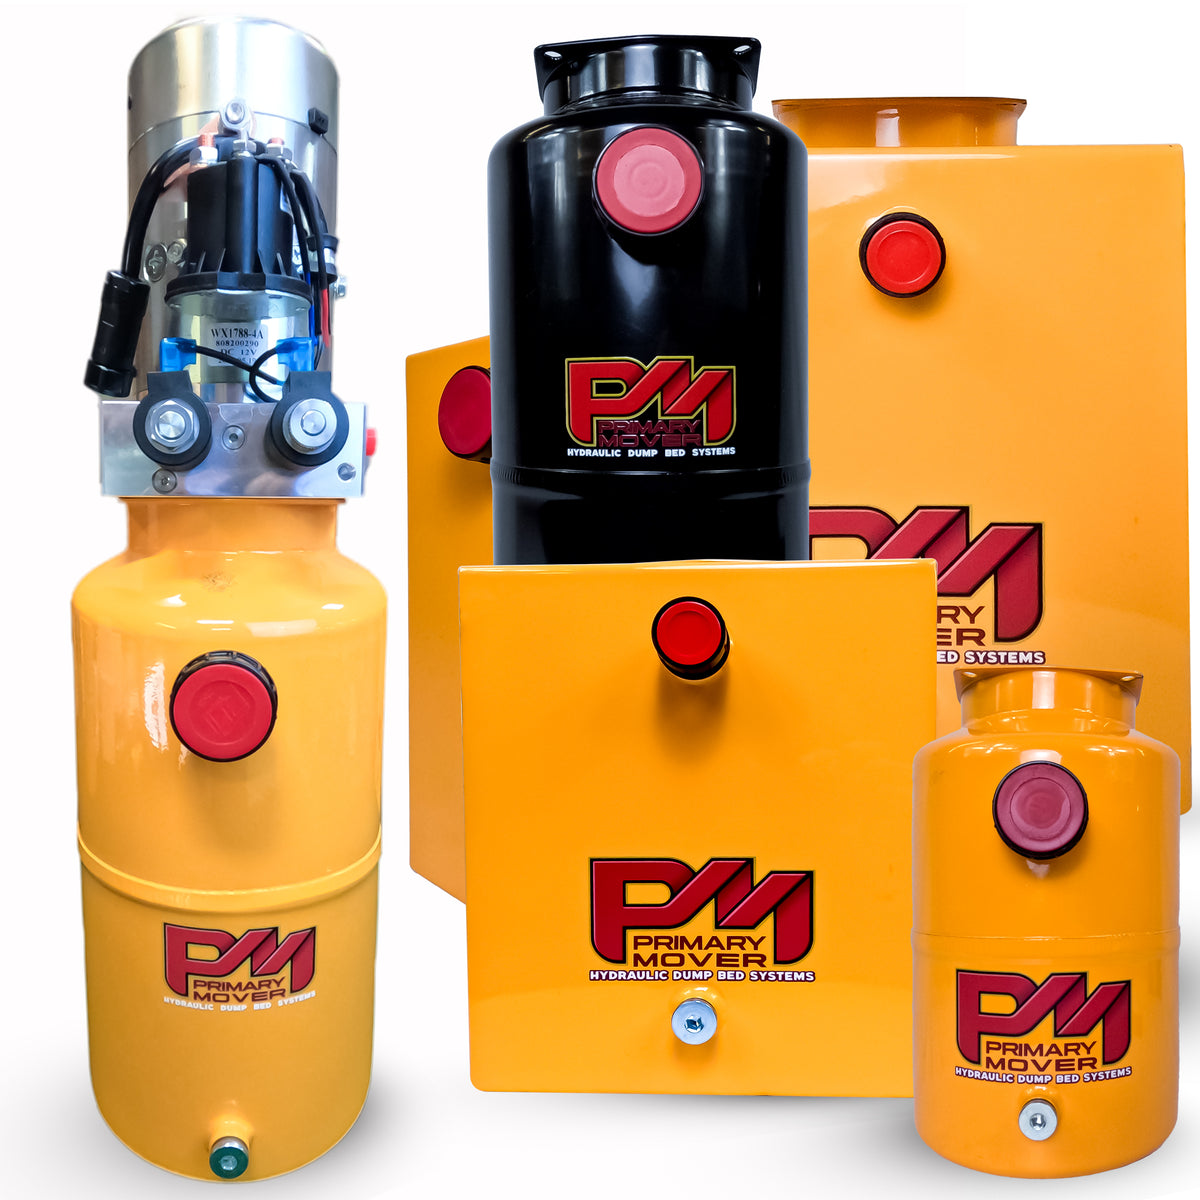 DLH 12V Double-Acting Hydraulic Pump - Steel Reservoir with yellow and black containers, featuring a red button and robust construction for efficient hydraulic operations.